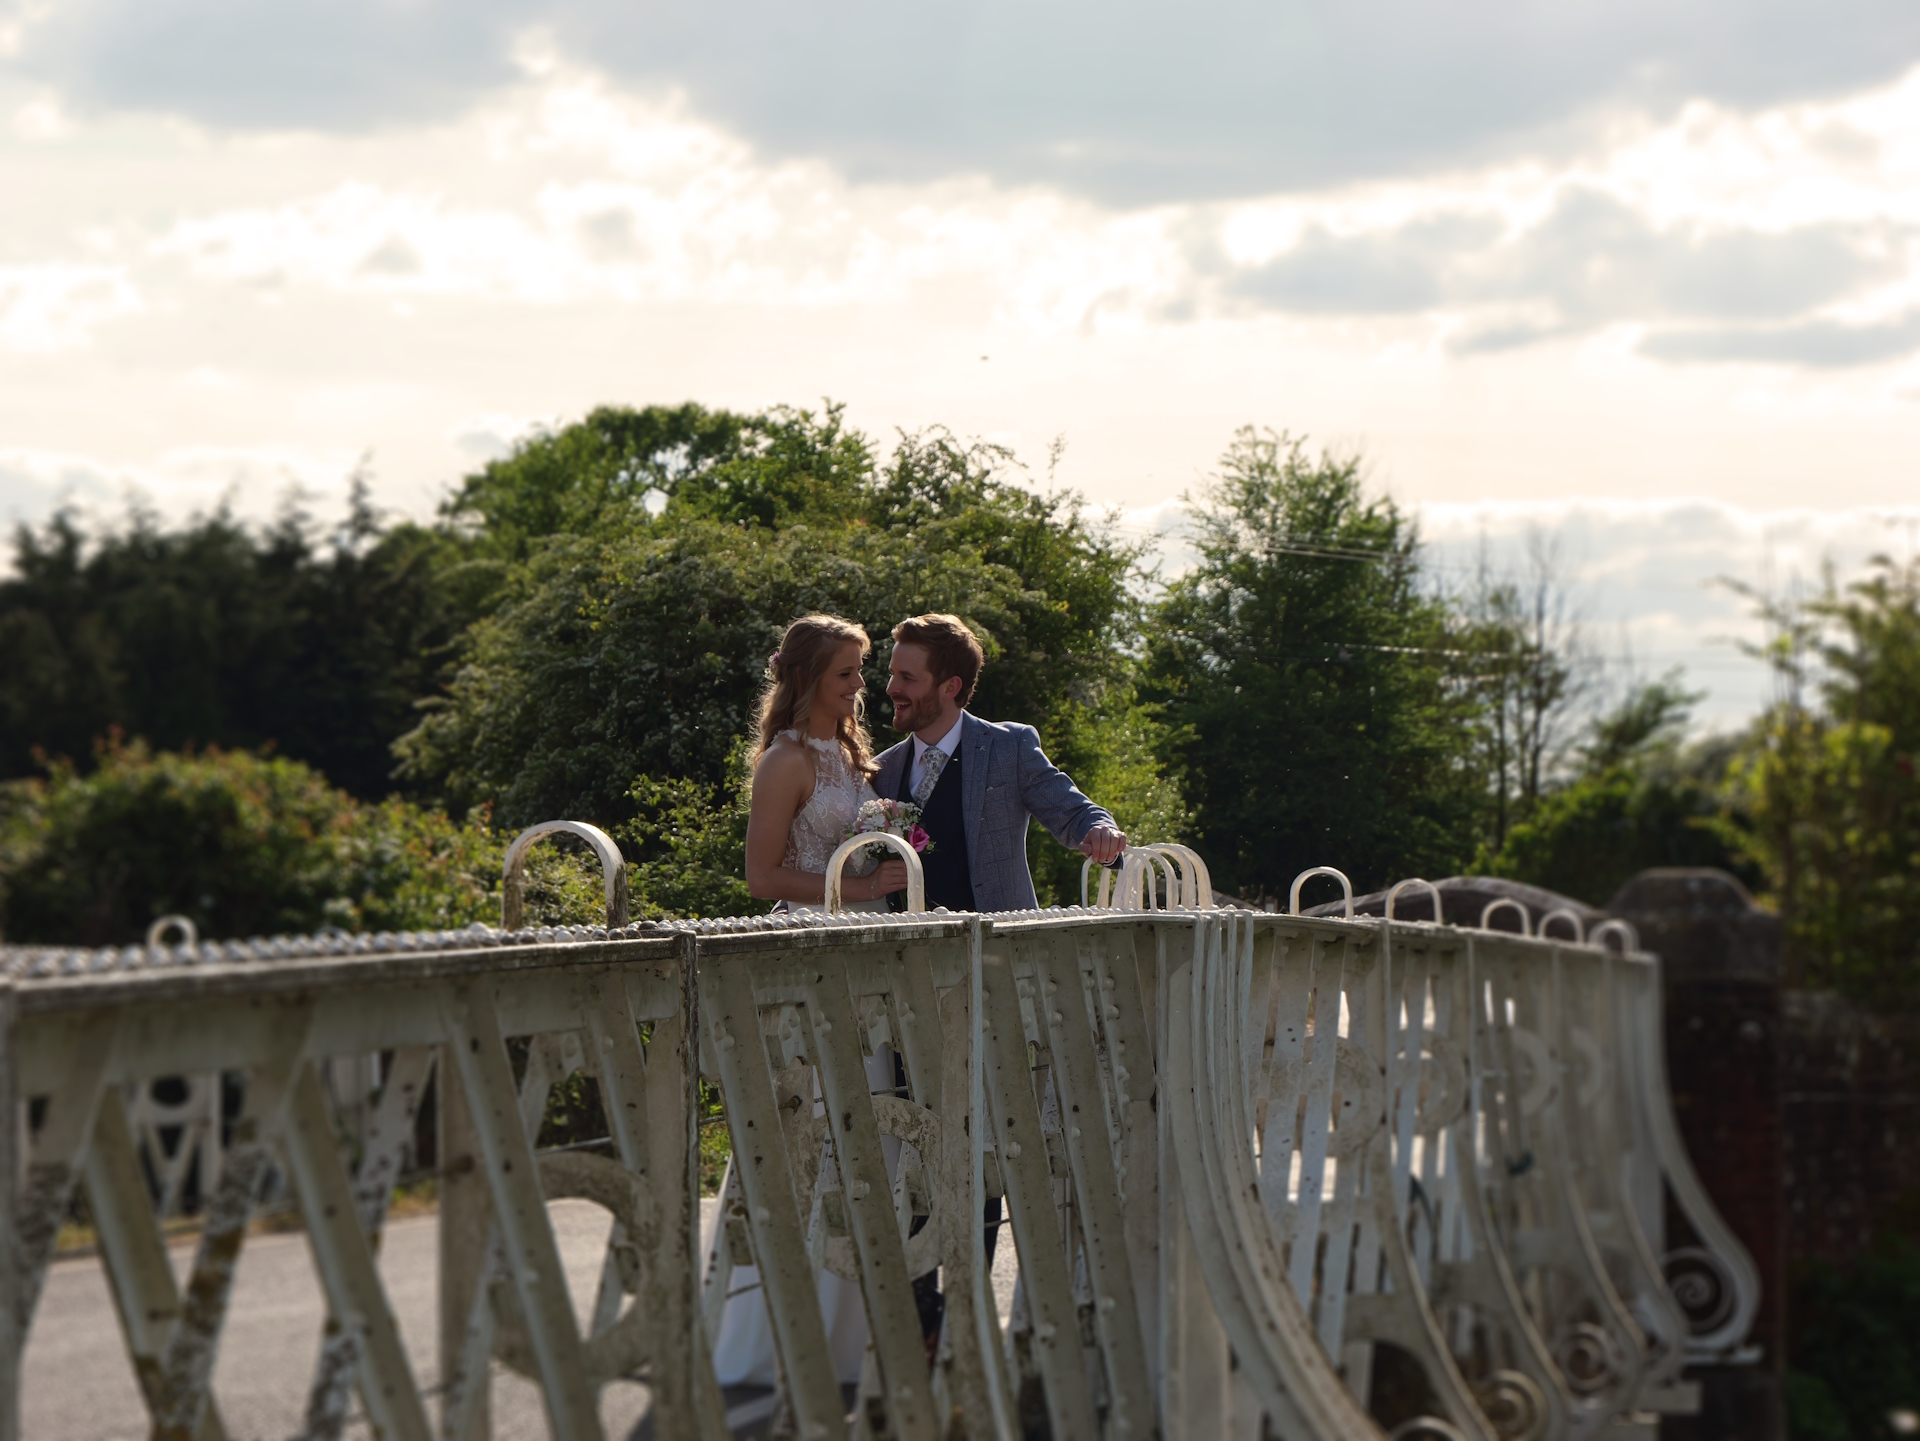 Sophie and Tom stand on an ornate bridge.